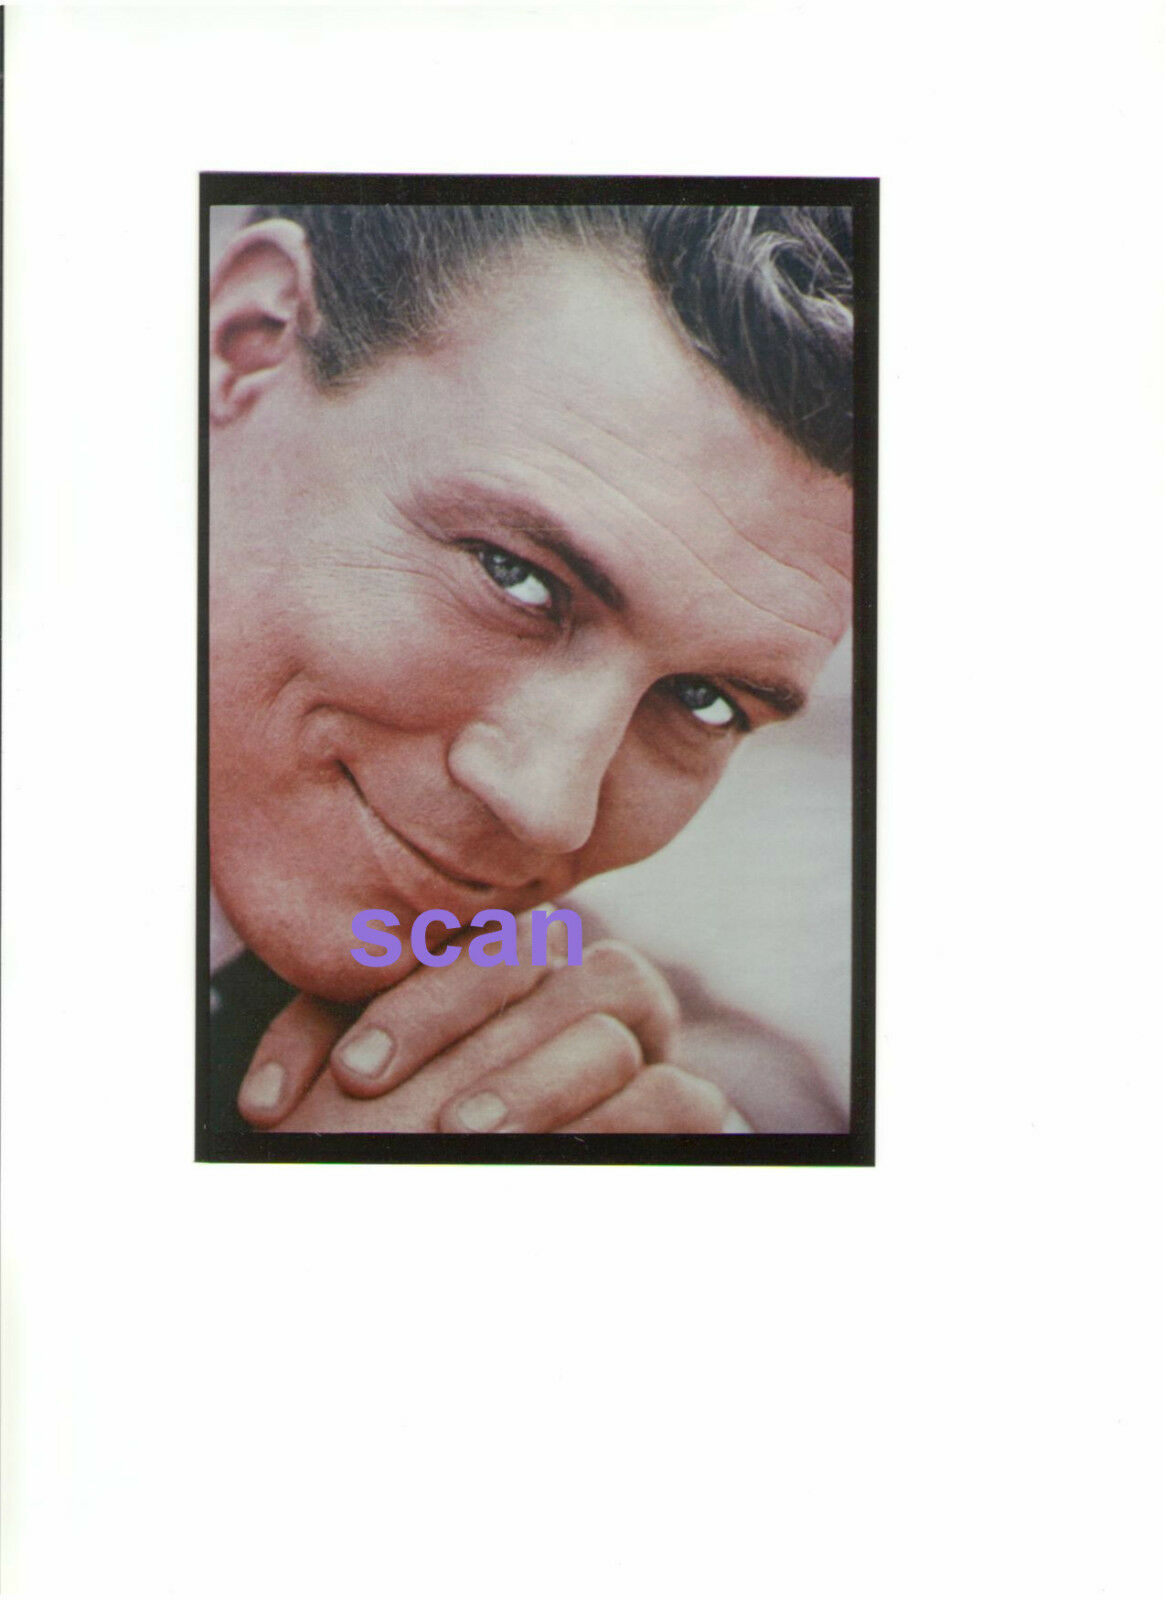 ROGER SMITH GORGEOUS HUNK WITH LOVELY SMILE & DIMPLES VINTAGE ORIGINAL PHOTO